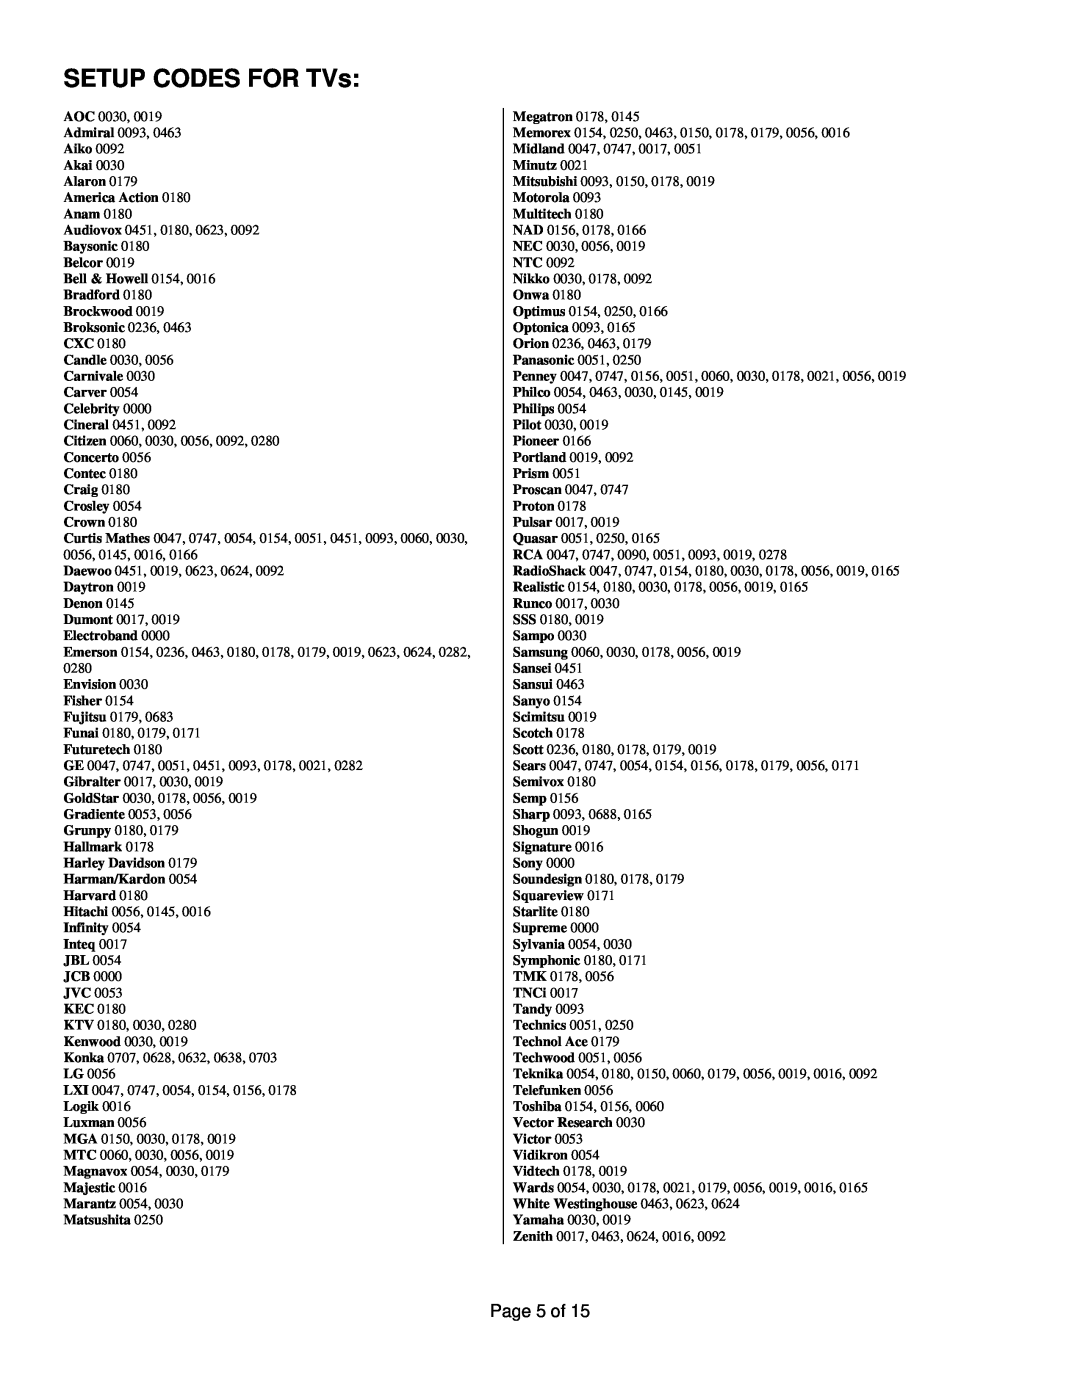 Universal Electronics Millennium 4 manual SETUP CODES FOR TVs, Page 5 of 